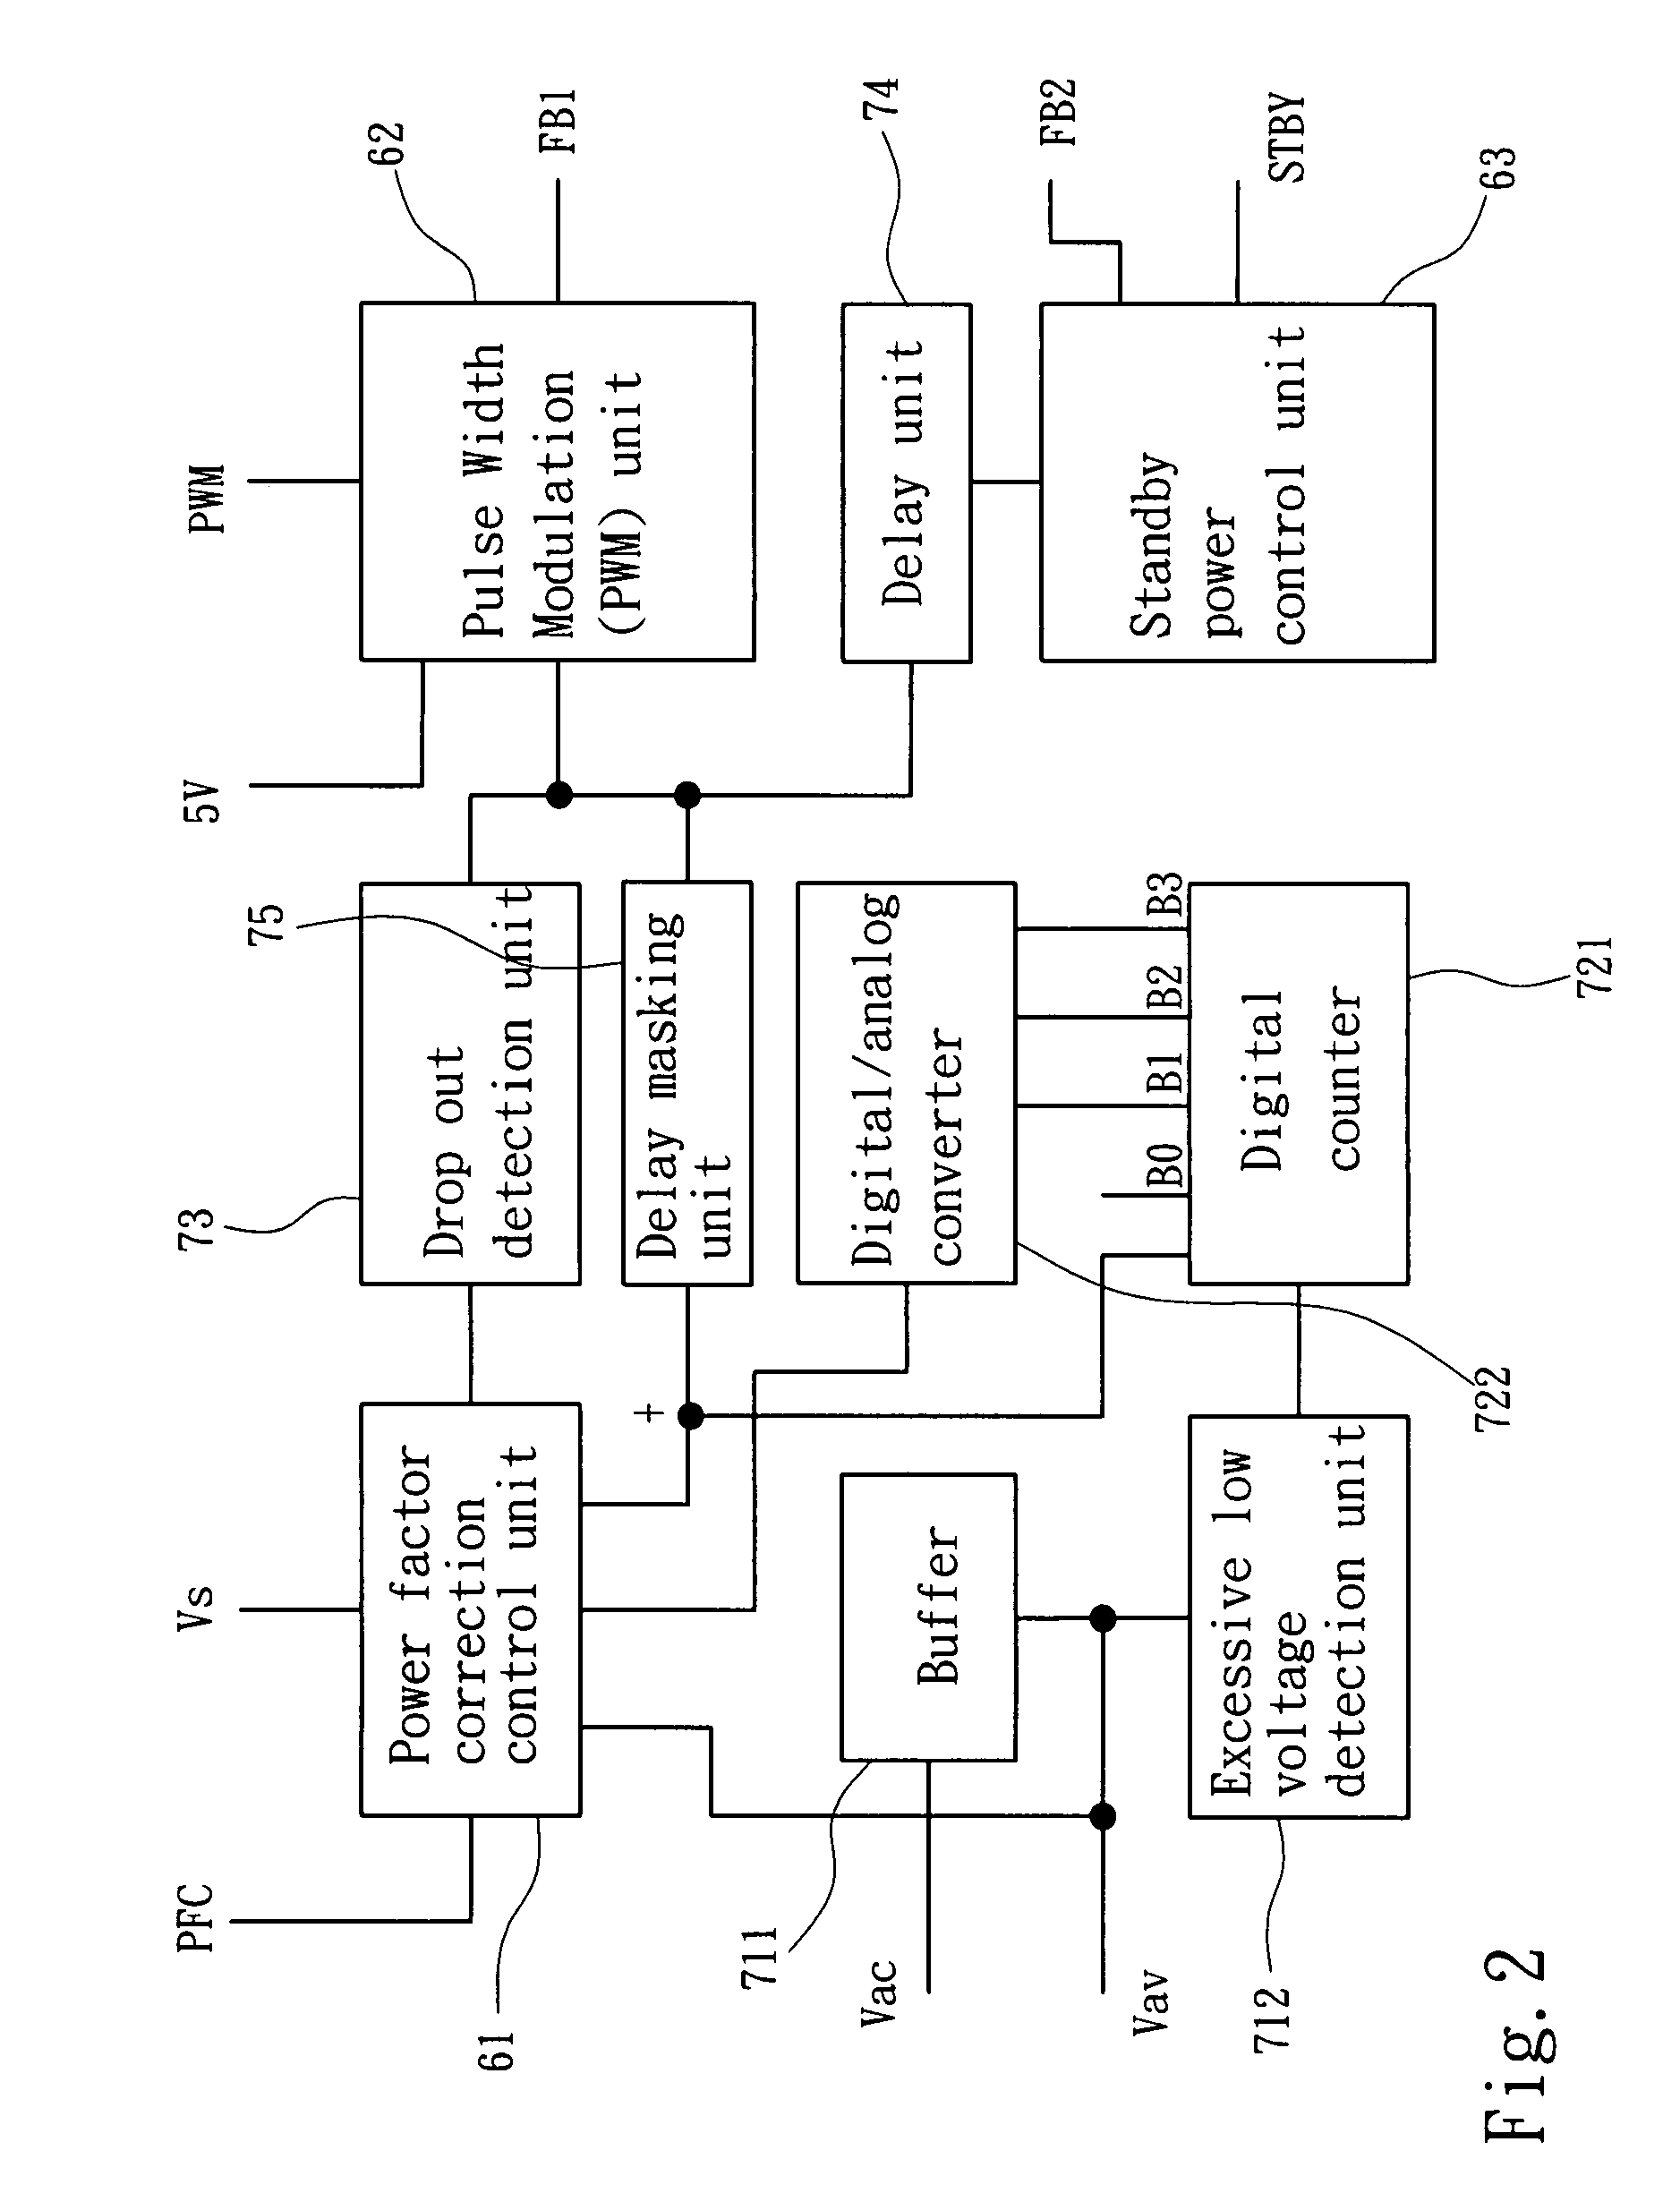 Power abnormal protection circuit